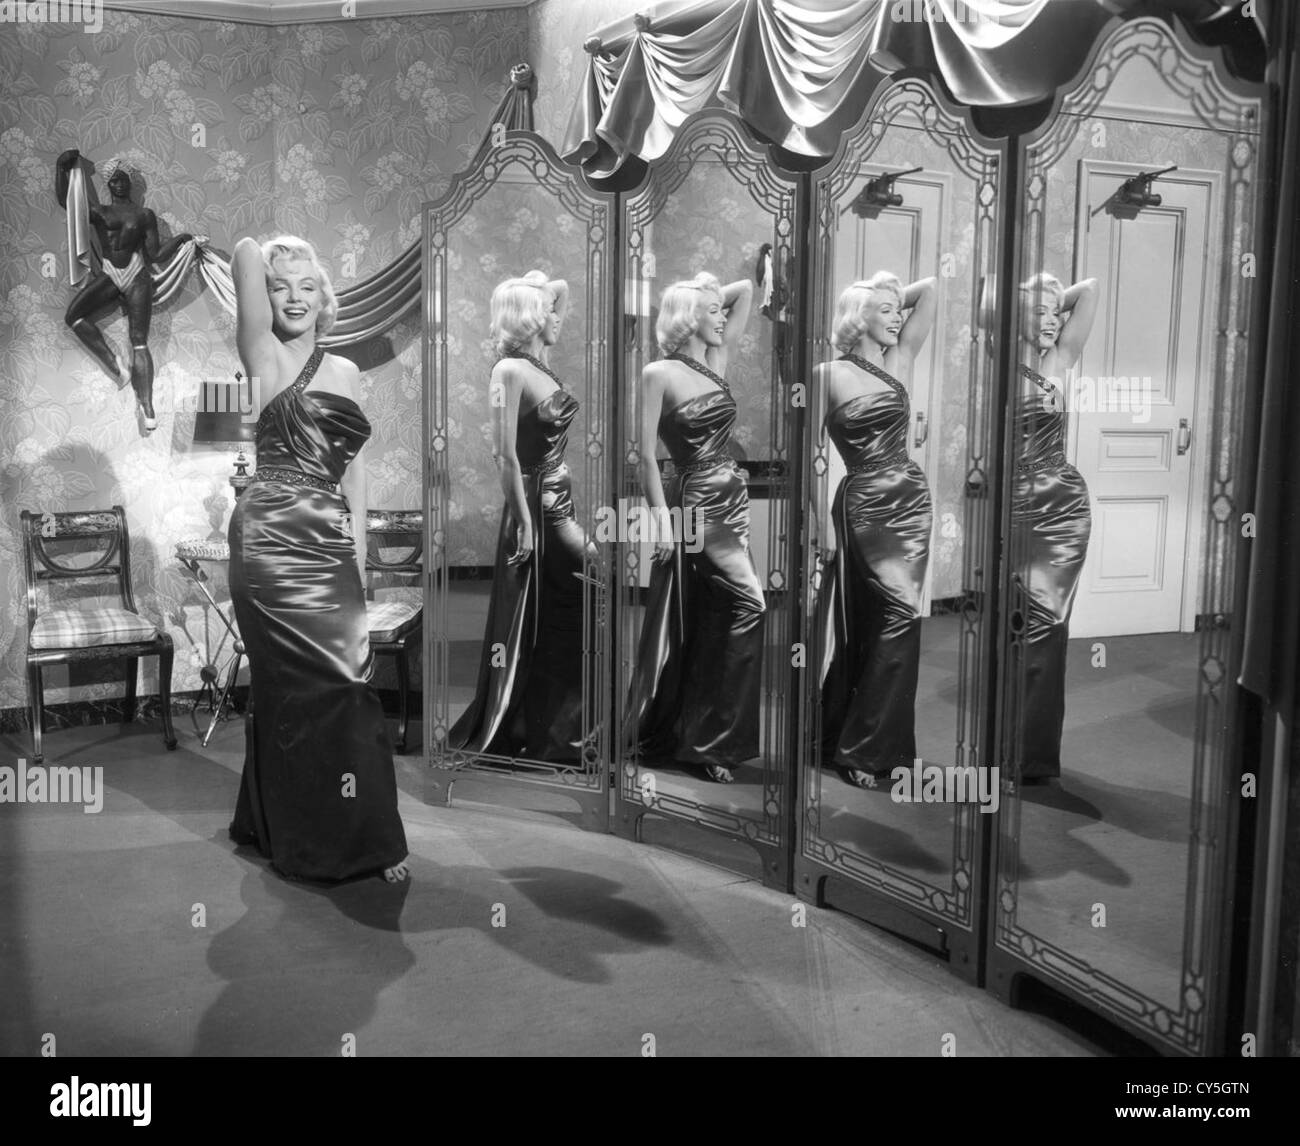 HOW TO MARRY A MILLIONAIRE (1953) MARILYN MONROE JAMES NEGULESCO (DIR) 007 MOVIESTORE COLLECTION LTD Stock Photo